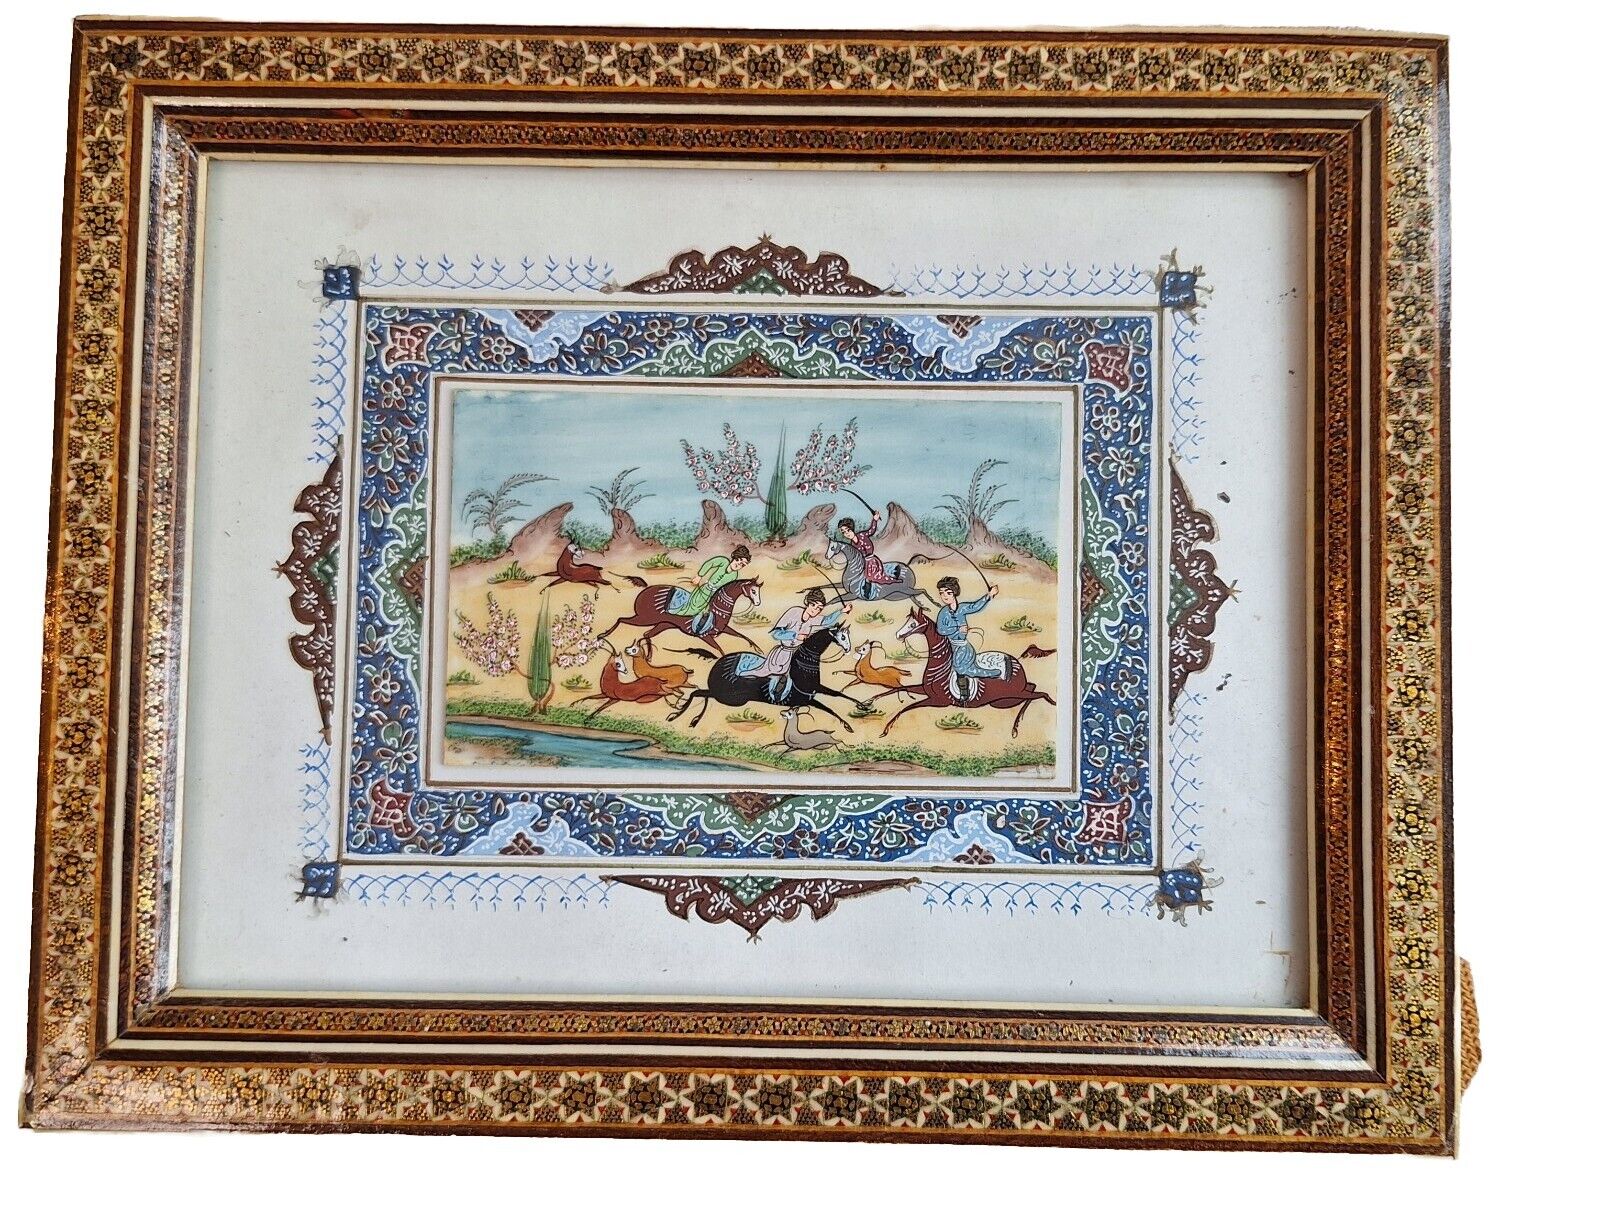 VTG Persian Hunting Scene Camel Bone Painting with Inlaid Marquetry Khatam Frame